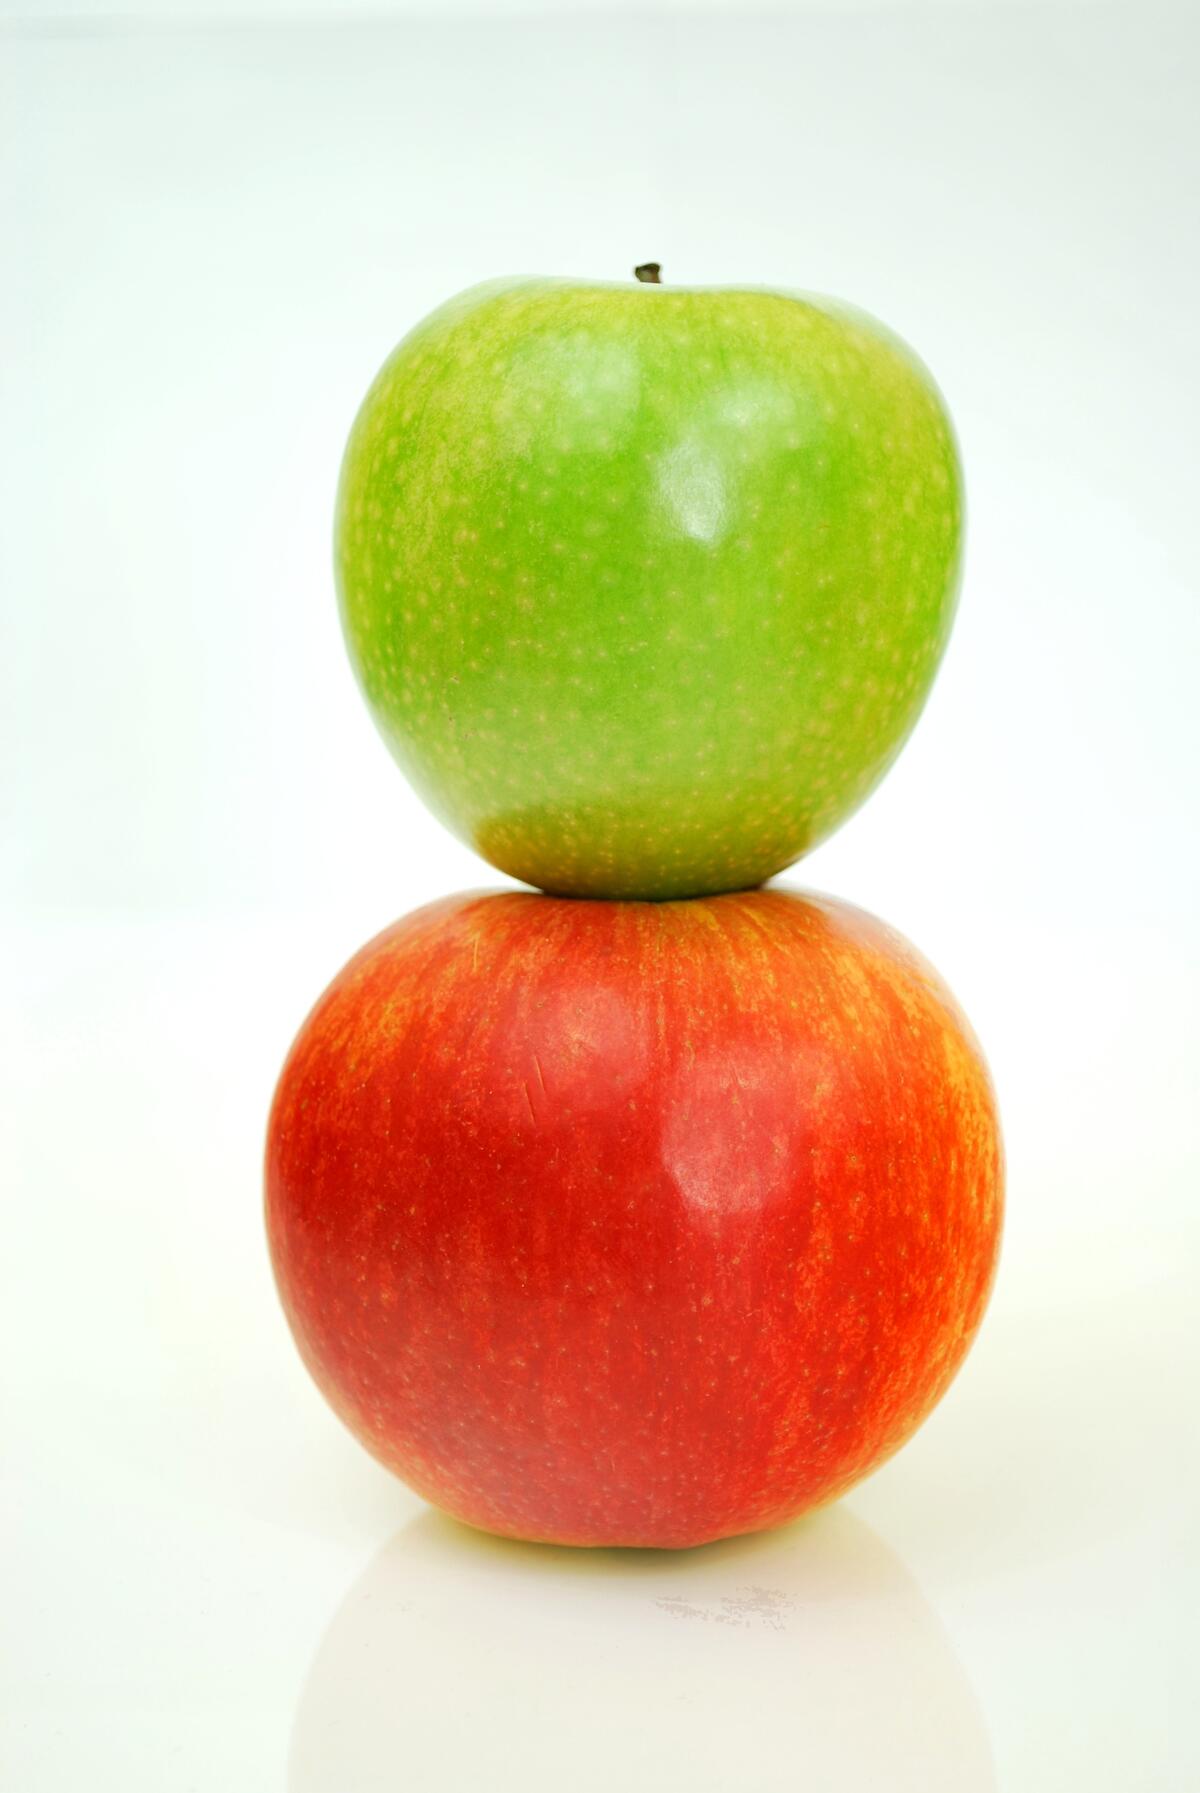 Green and red apple